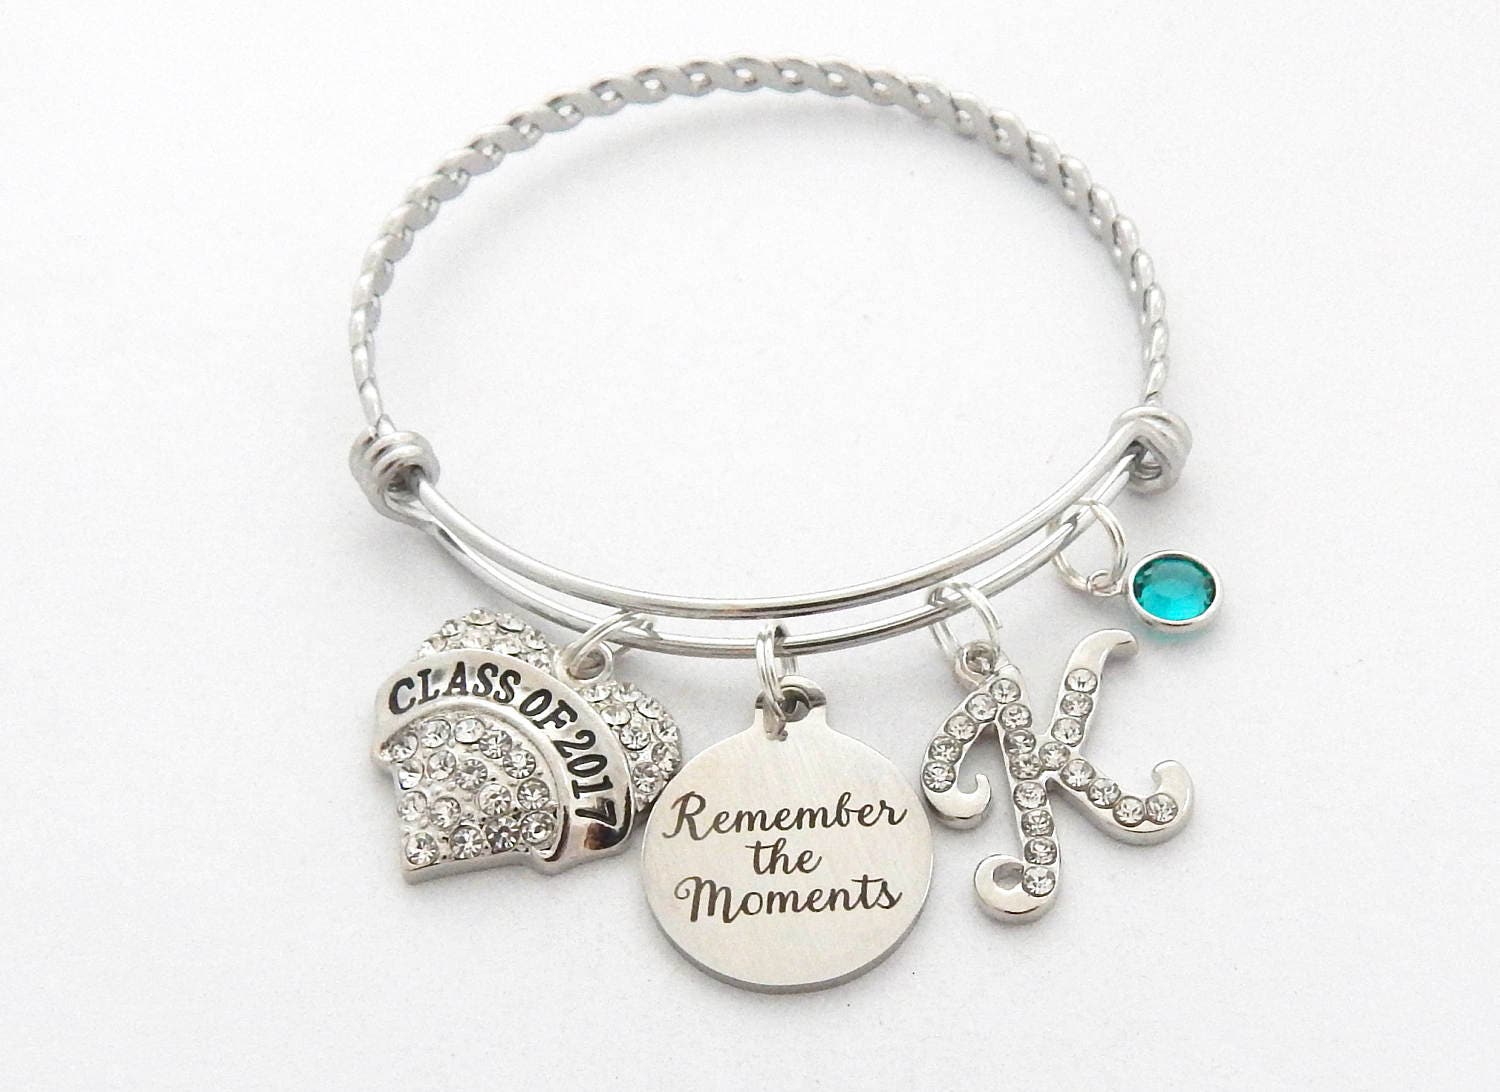 2017 Graduation Gift, Graduate Gift High School Graduation Gift, Class of 2017 Gift, Remember the Moment, Senior Gift, Inspirational jewelry